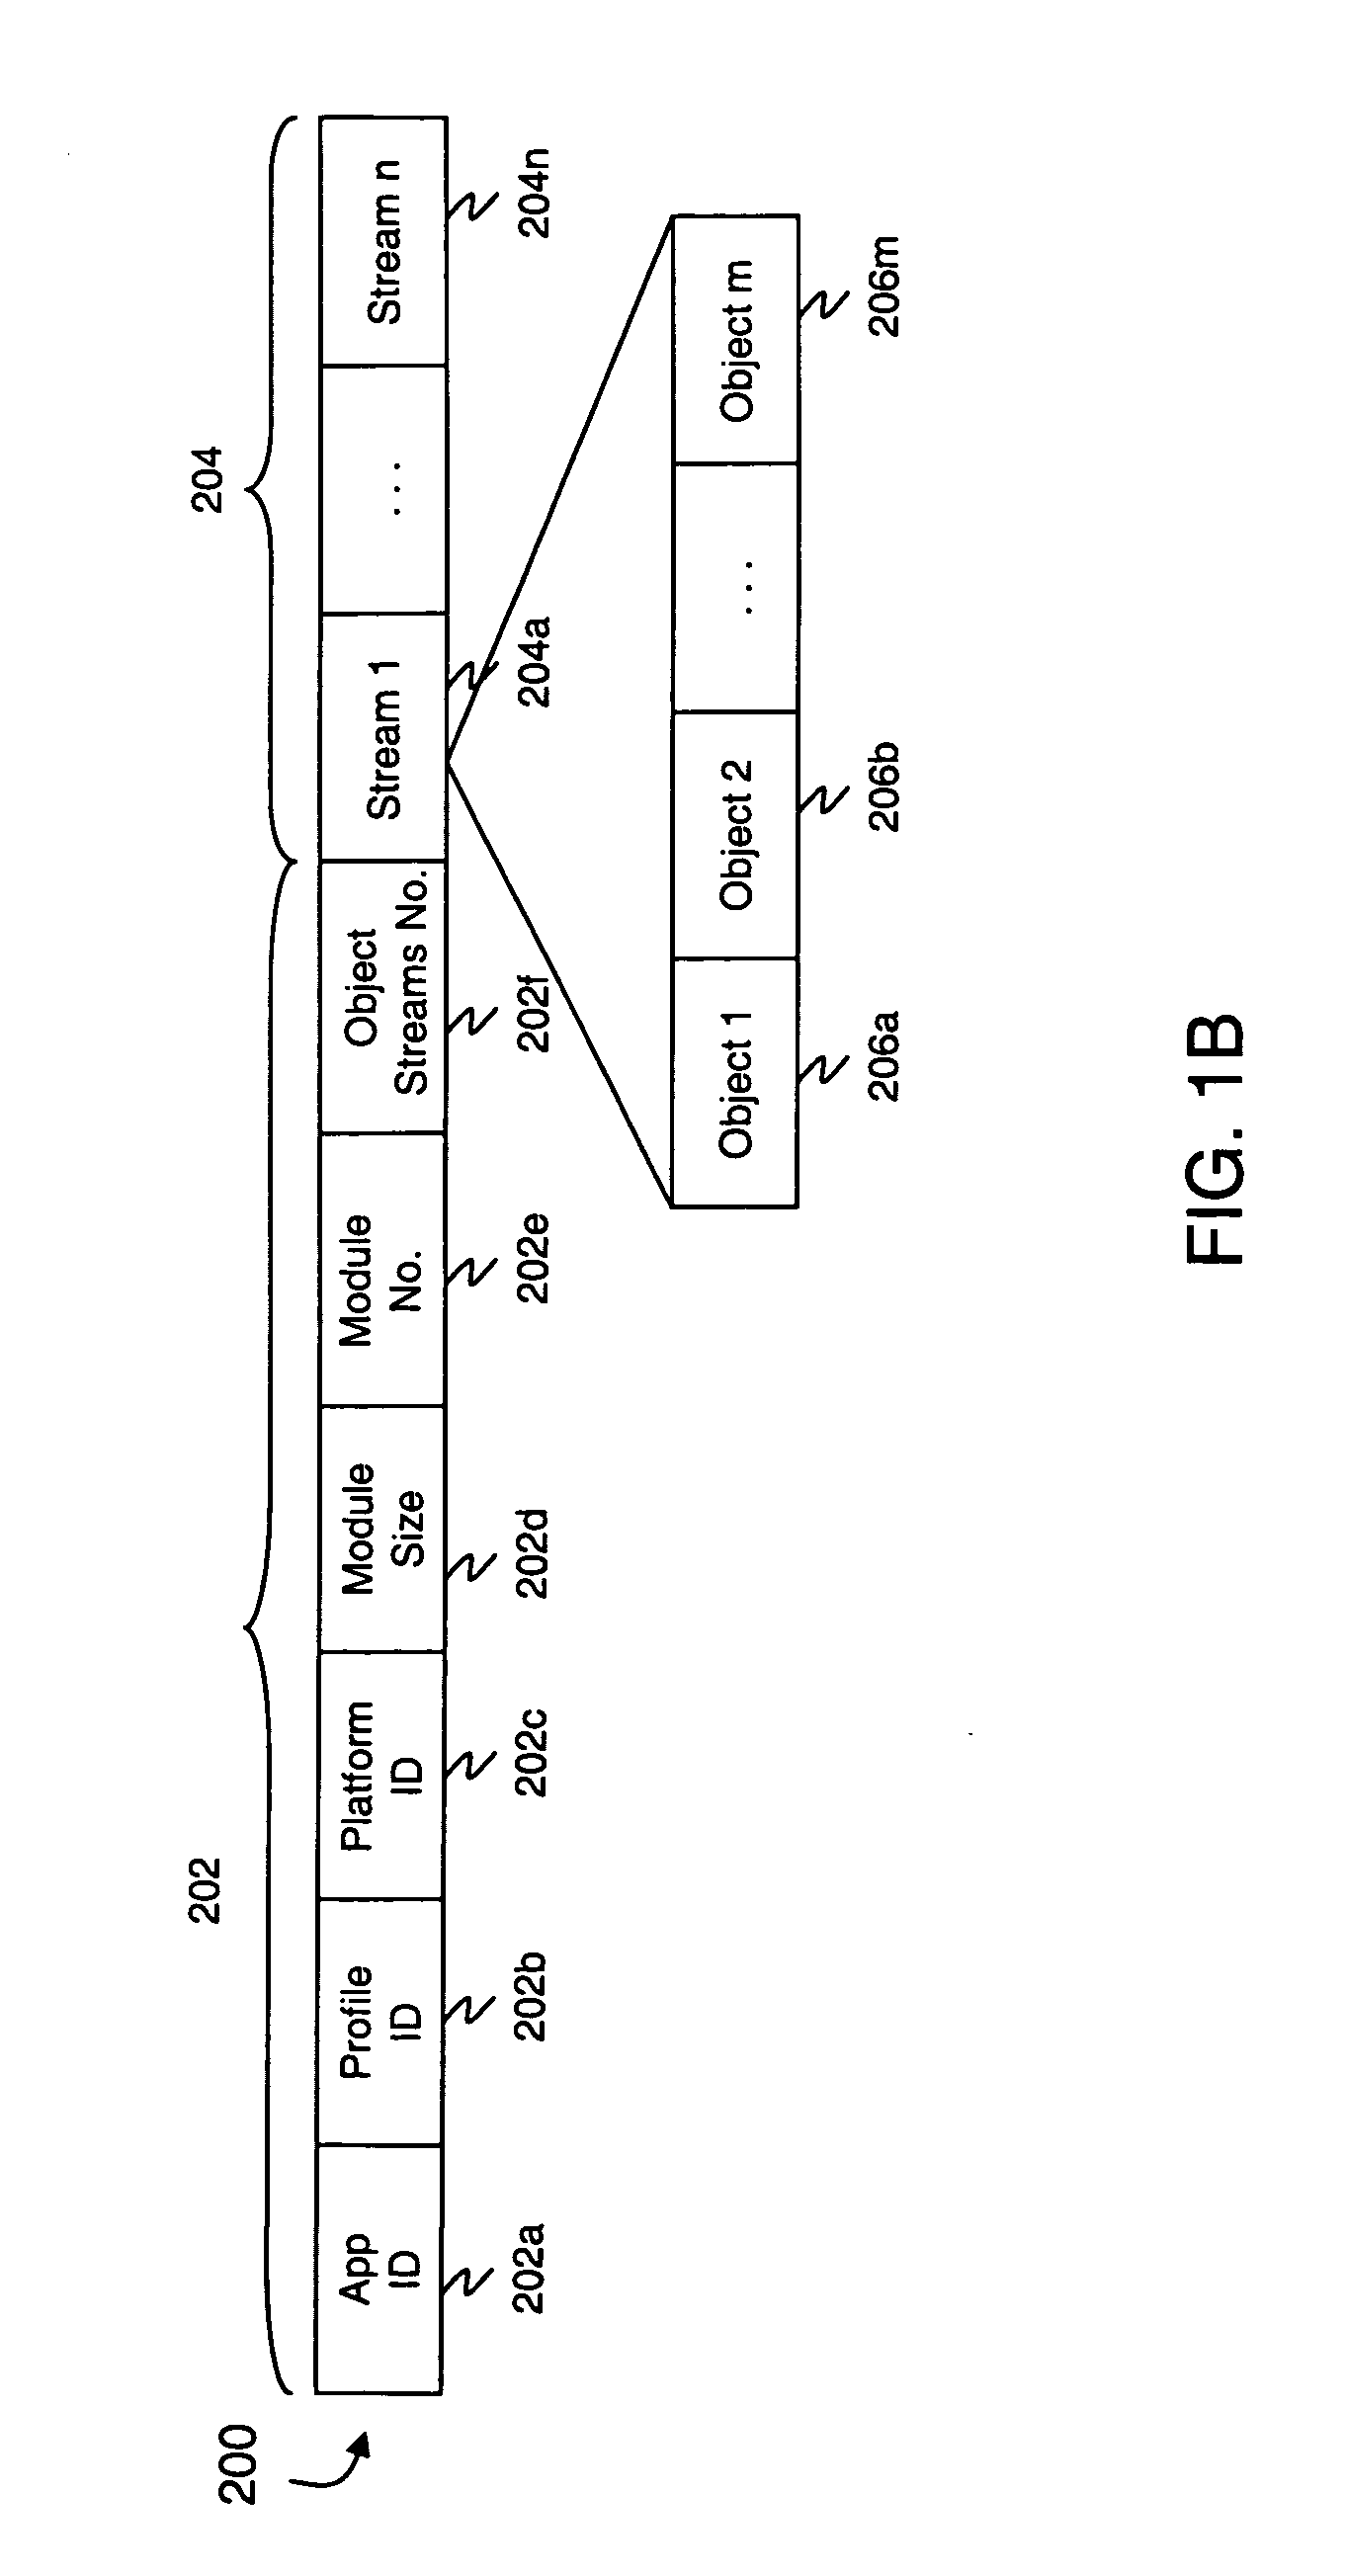 System and method for describing presentation and behavior information in an ITV application